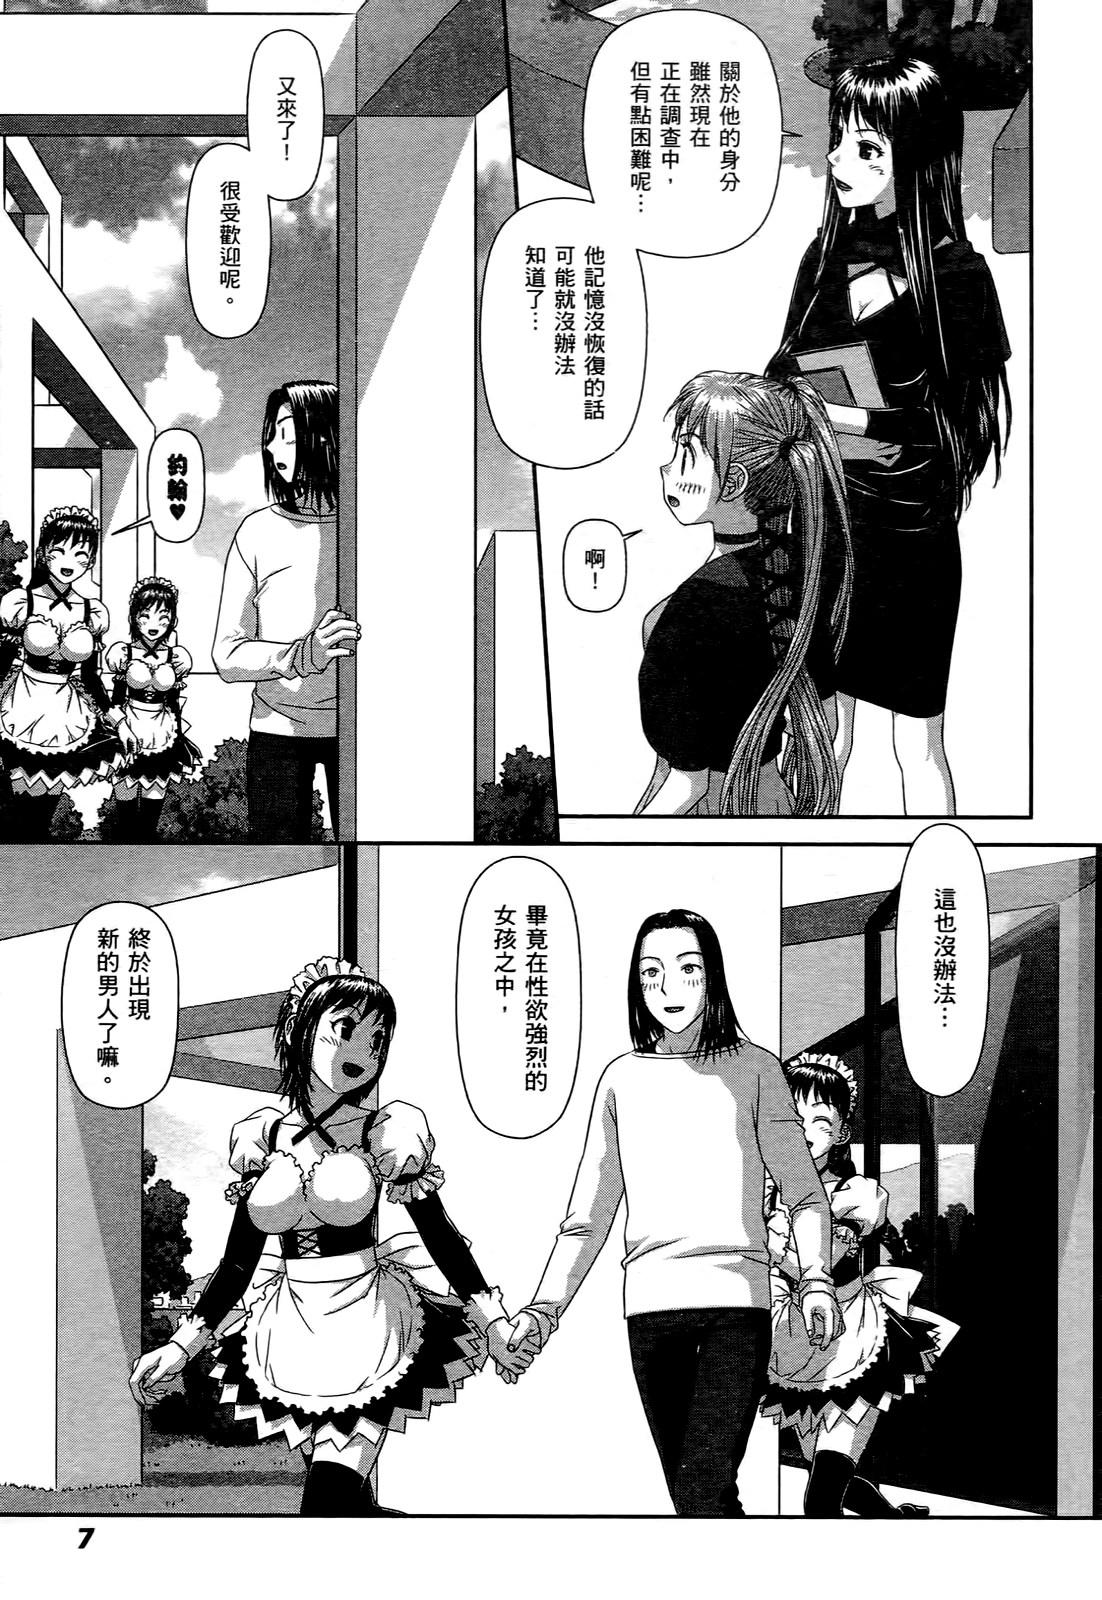 Euro My doll house 2 | 甜蜜寶貝屋 2 Fat - Page 9